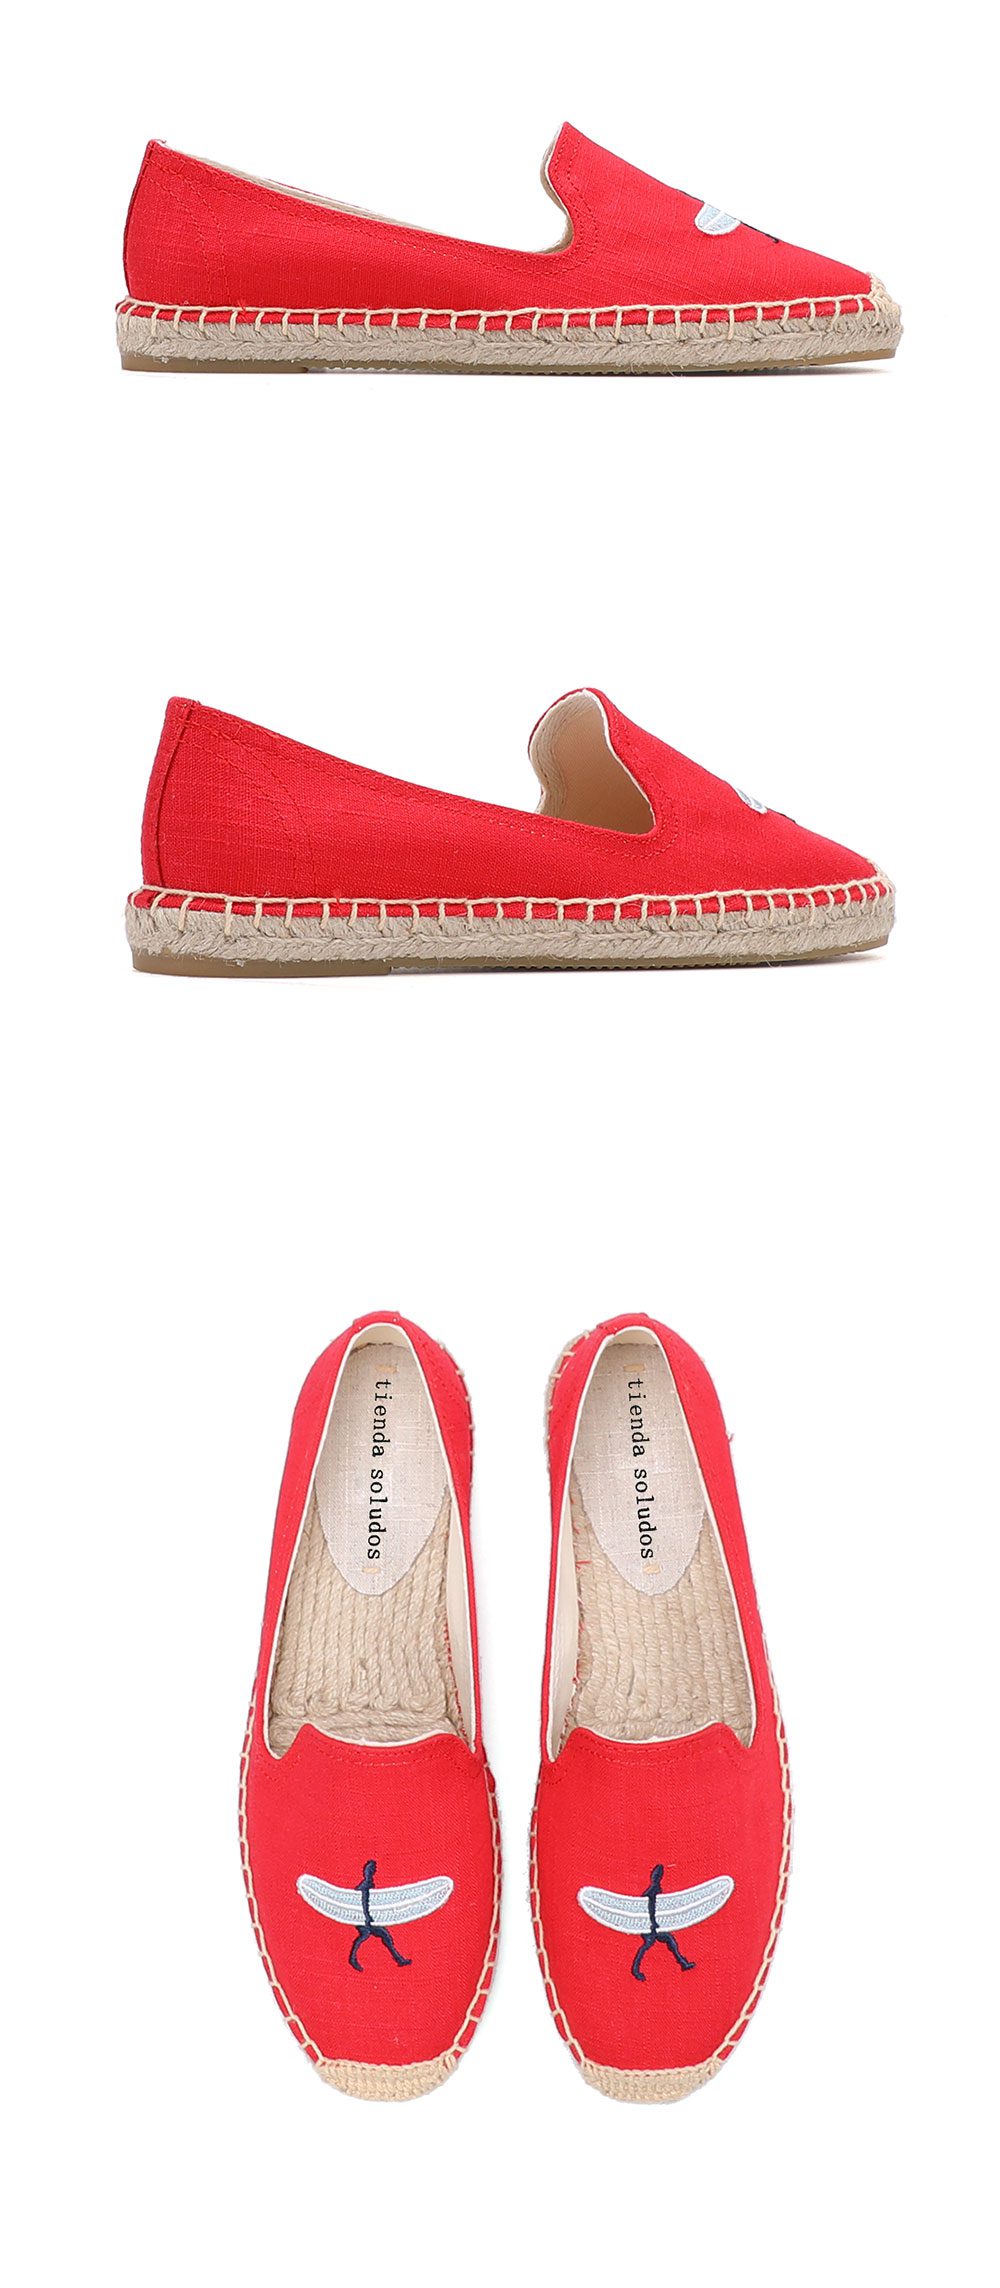 2021 Slip-on Direct Selling Limited Sale Flat Platform Hemp Rubber Sapatos Zapatillas Mujer Casual Womens Espadrilles Shoes